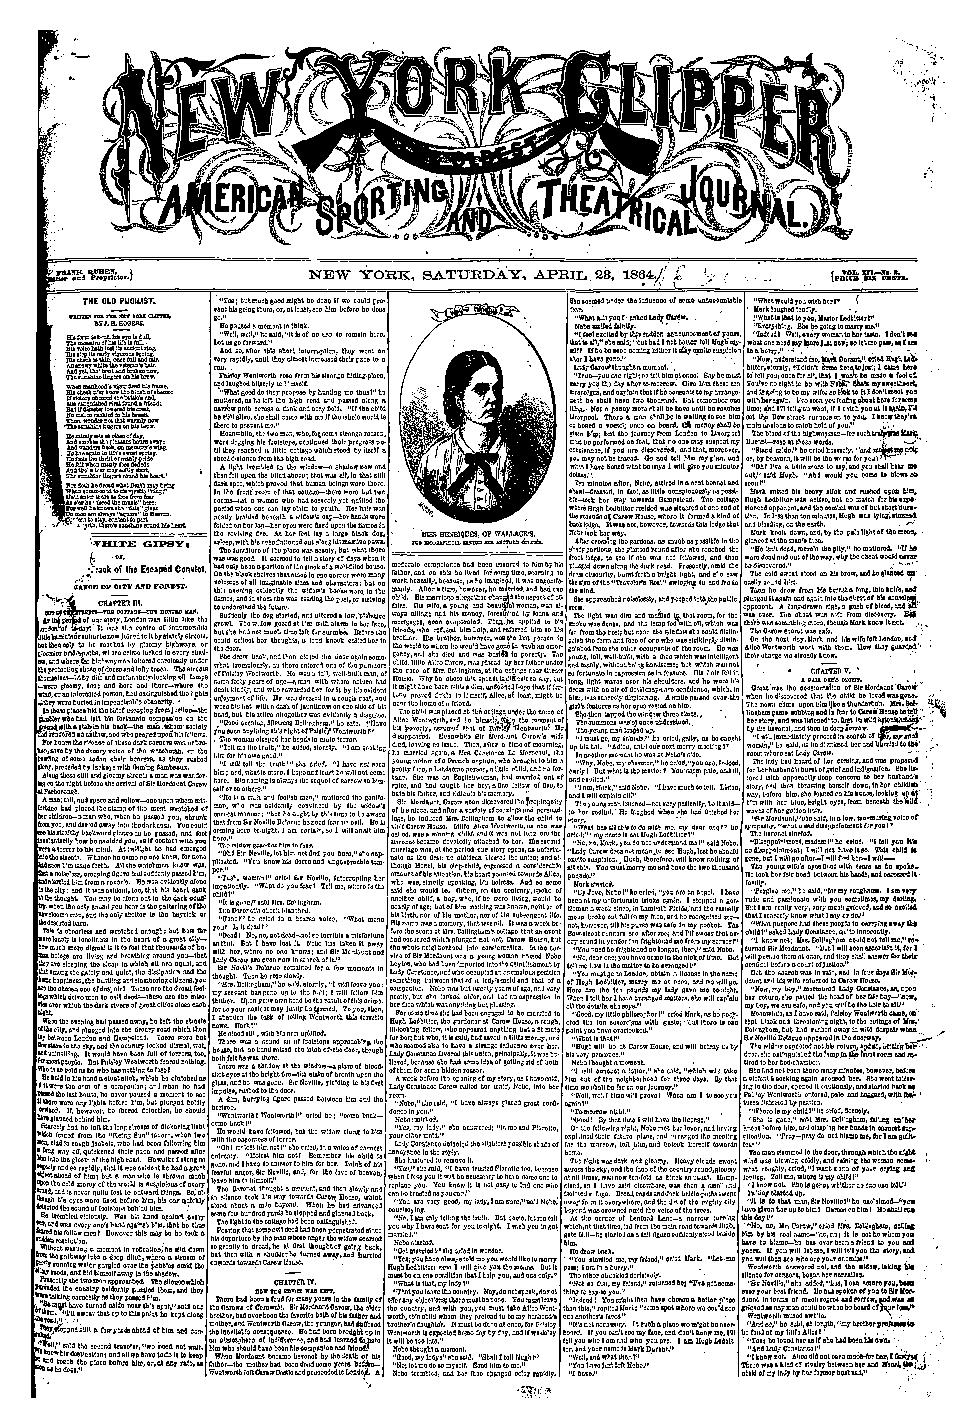 Thumbnail image of a page from New York Clipper